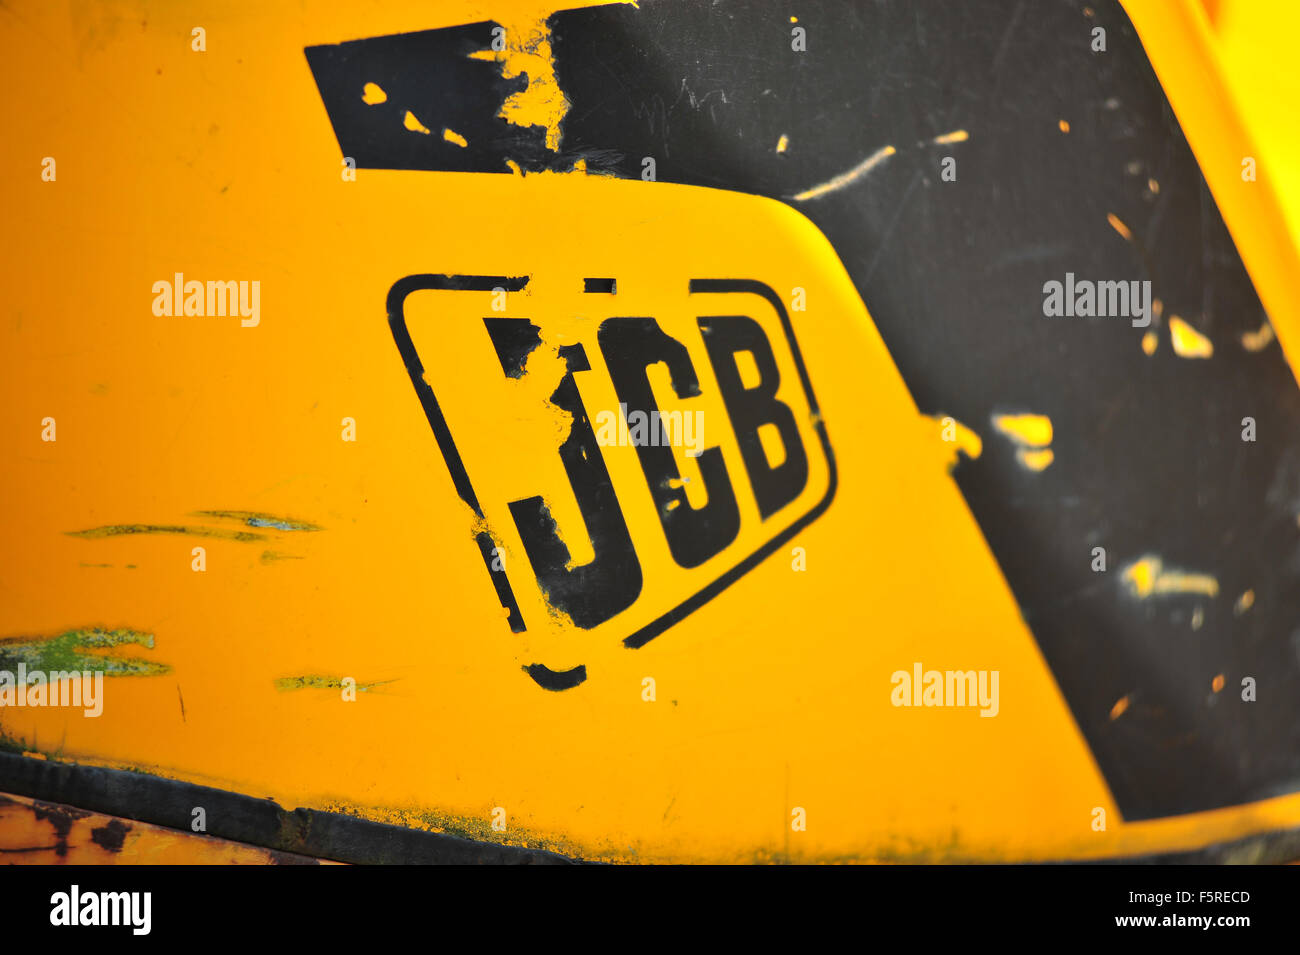 The side of a worn JCB digger in a garden in the UK. Stock Photo